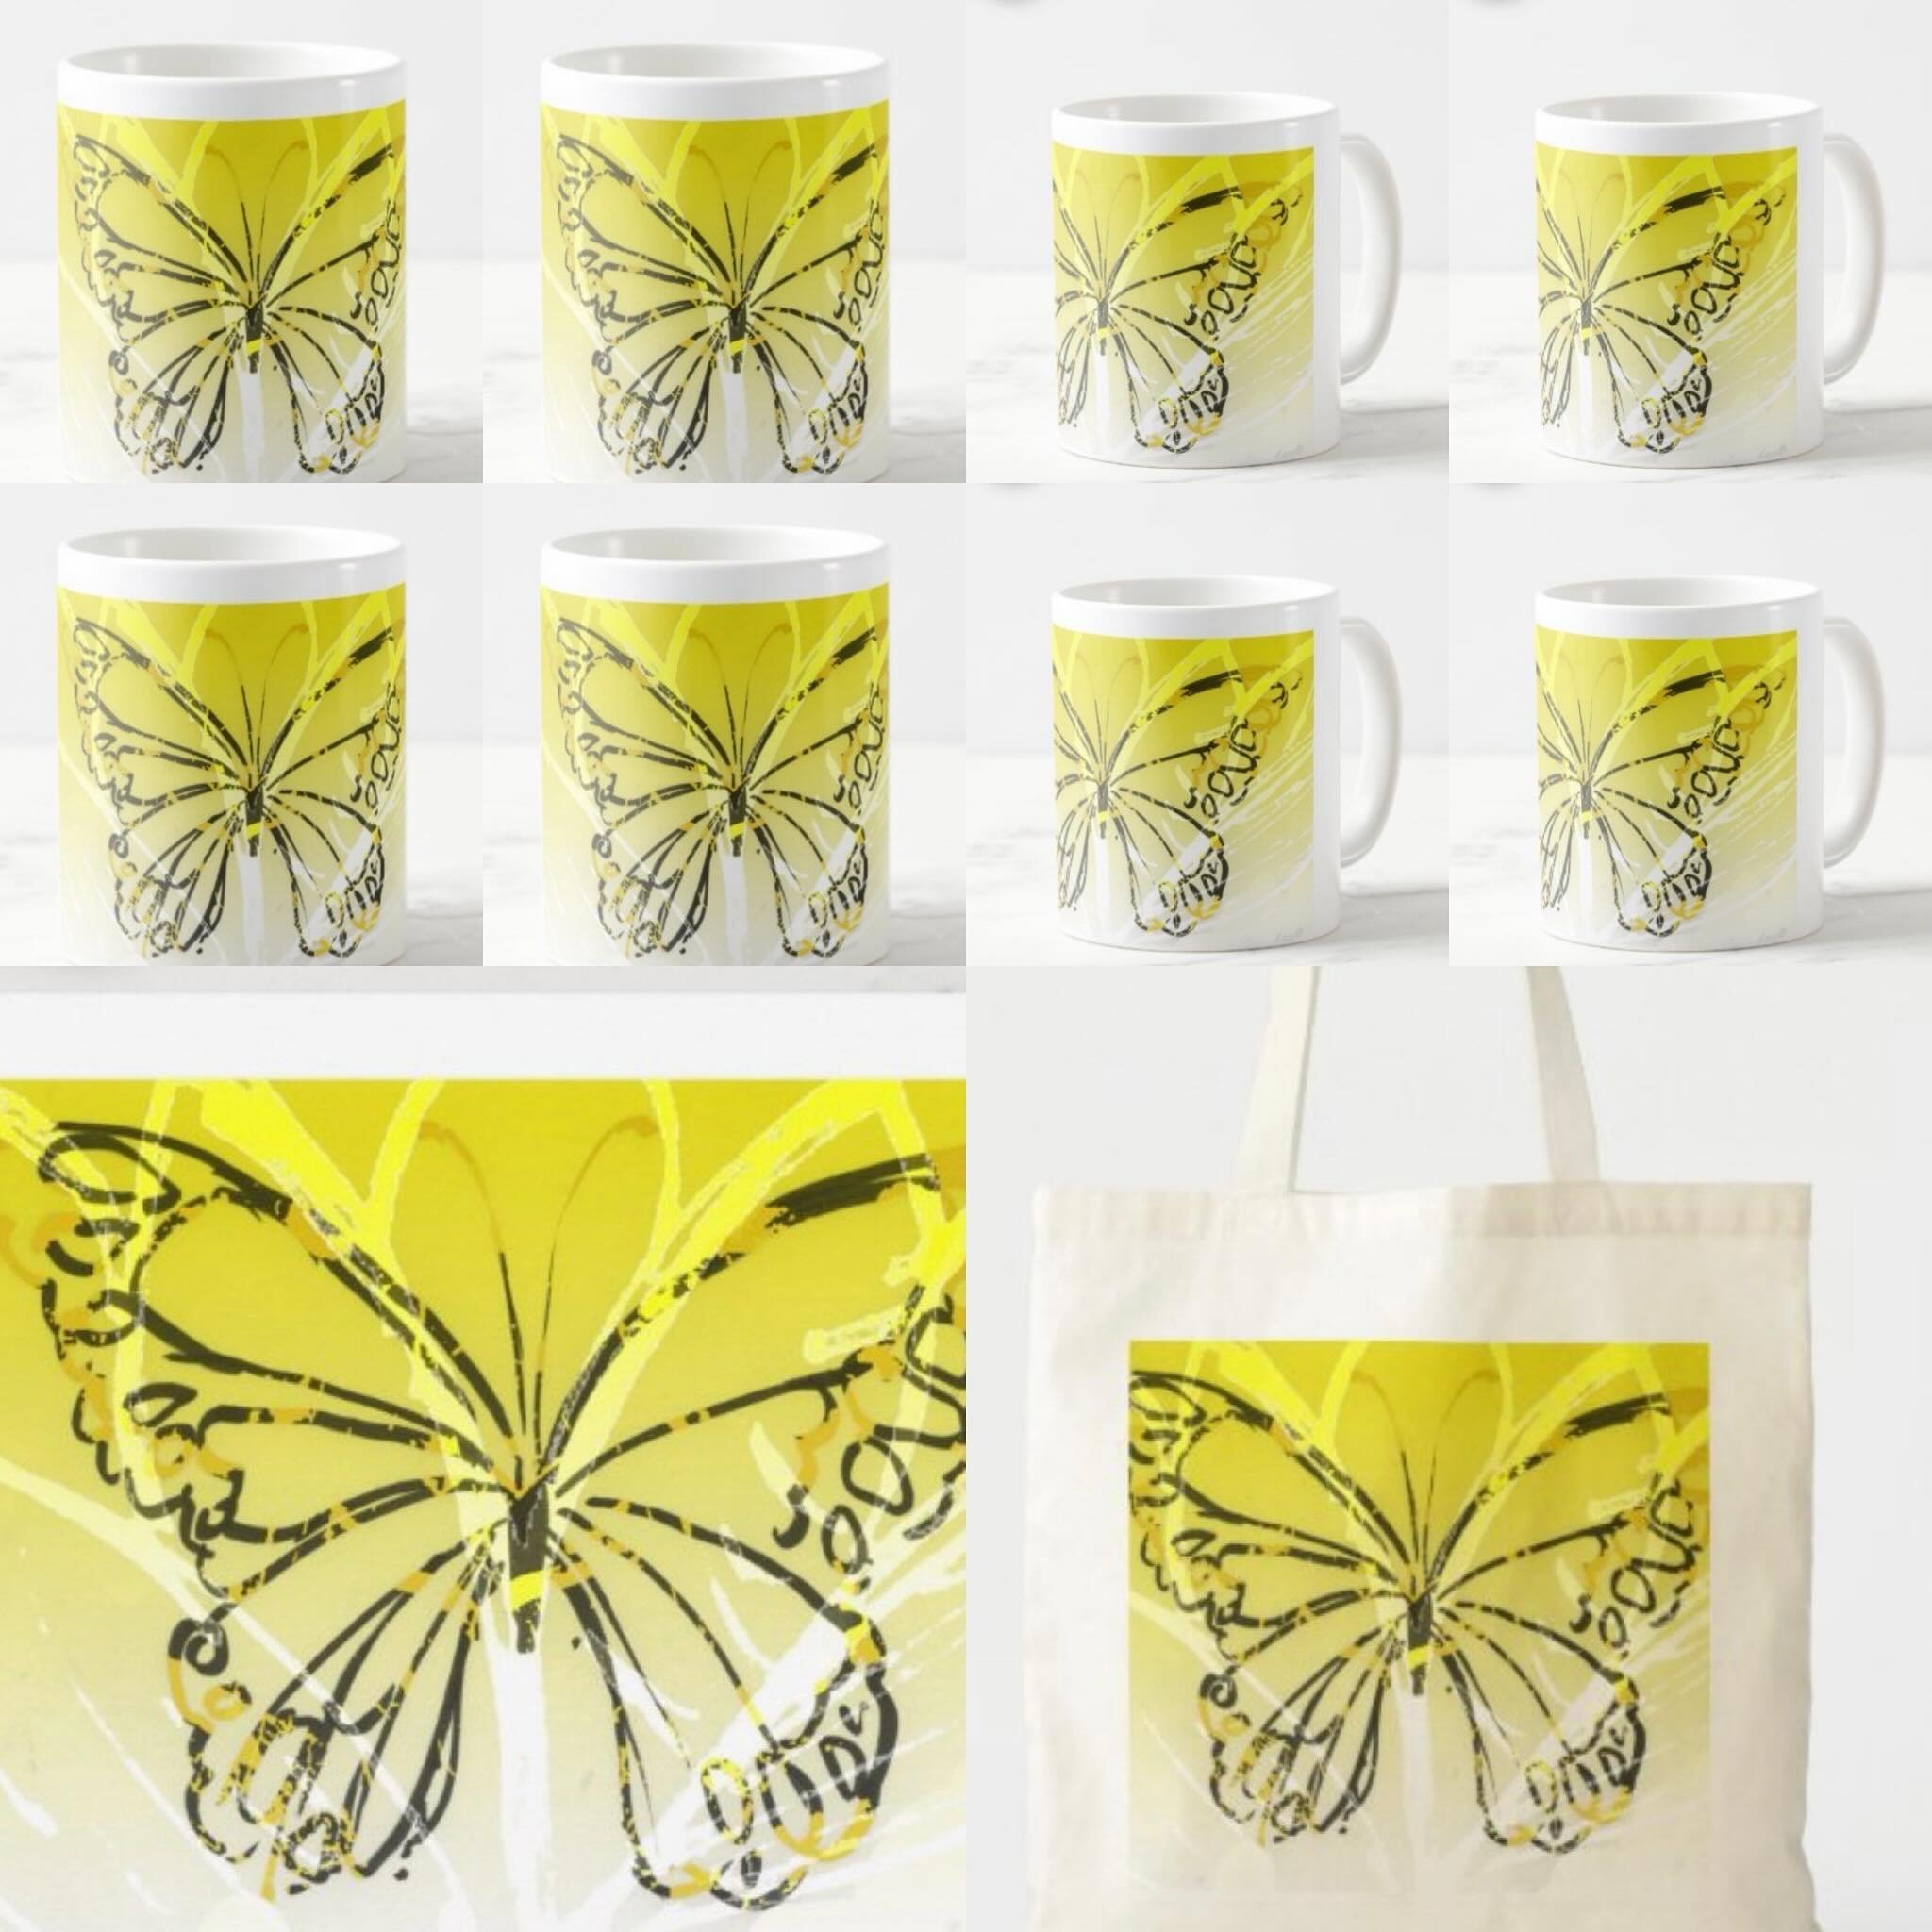 Mother&rsquo;s Day &ldquo;Mellow Yellow &ldquo;🎶
Click on Spring link to order now for Mother&rsquo;s Day US
#mothersdaygift 
#butterflygift 
#yellowtotebag 
#mothersdaygiftideas 
#mothersdaycards 
#butterflymugs 
#coffeetime 
#teatime